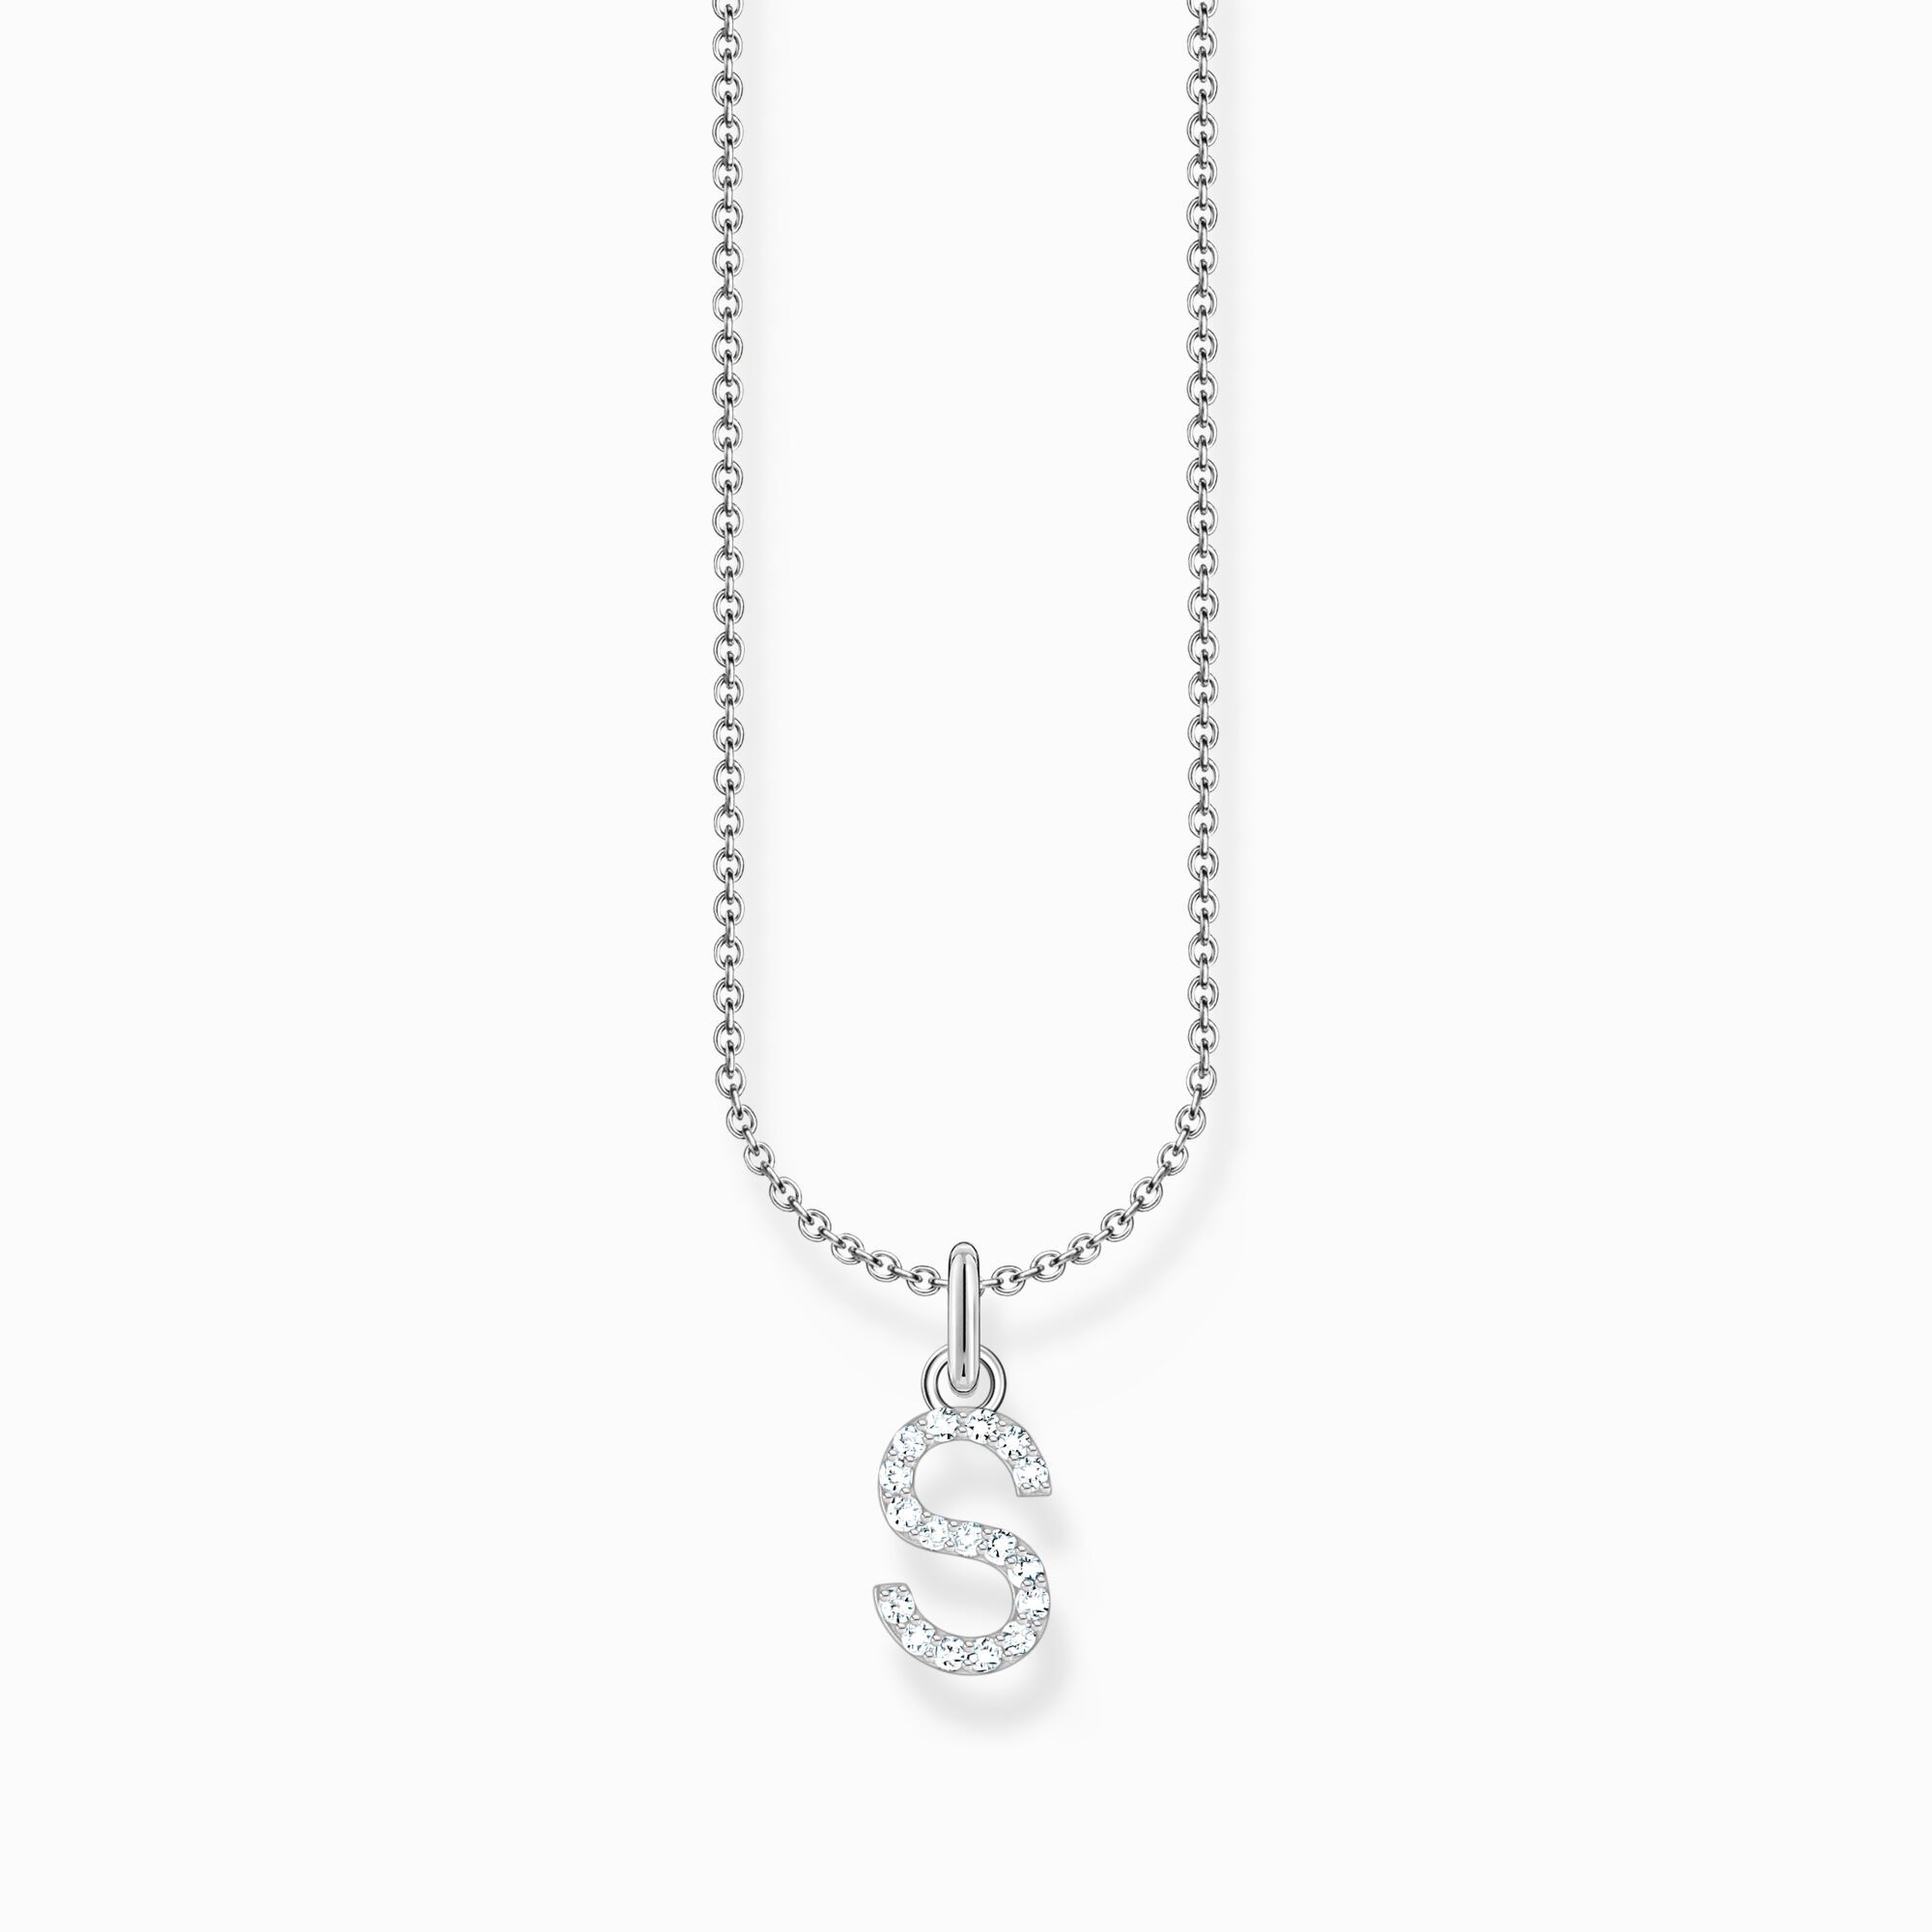 Silver necklace with letter pendant S and white zirconia from the Charming Collection collection in the THOMAS SABO online store